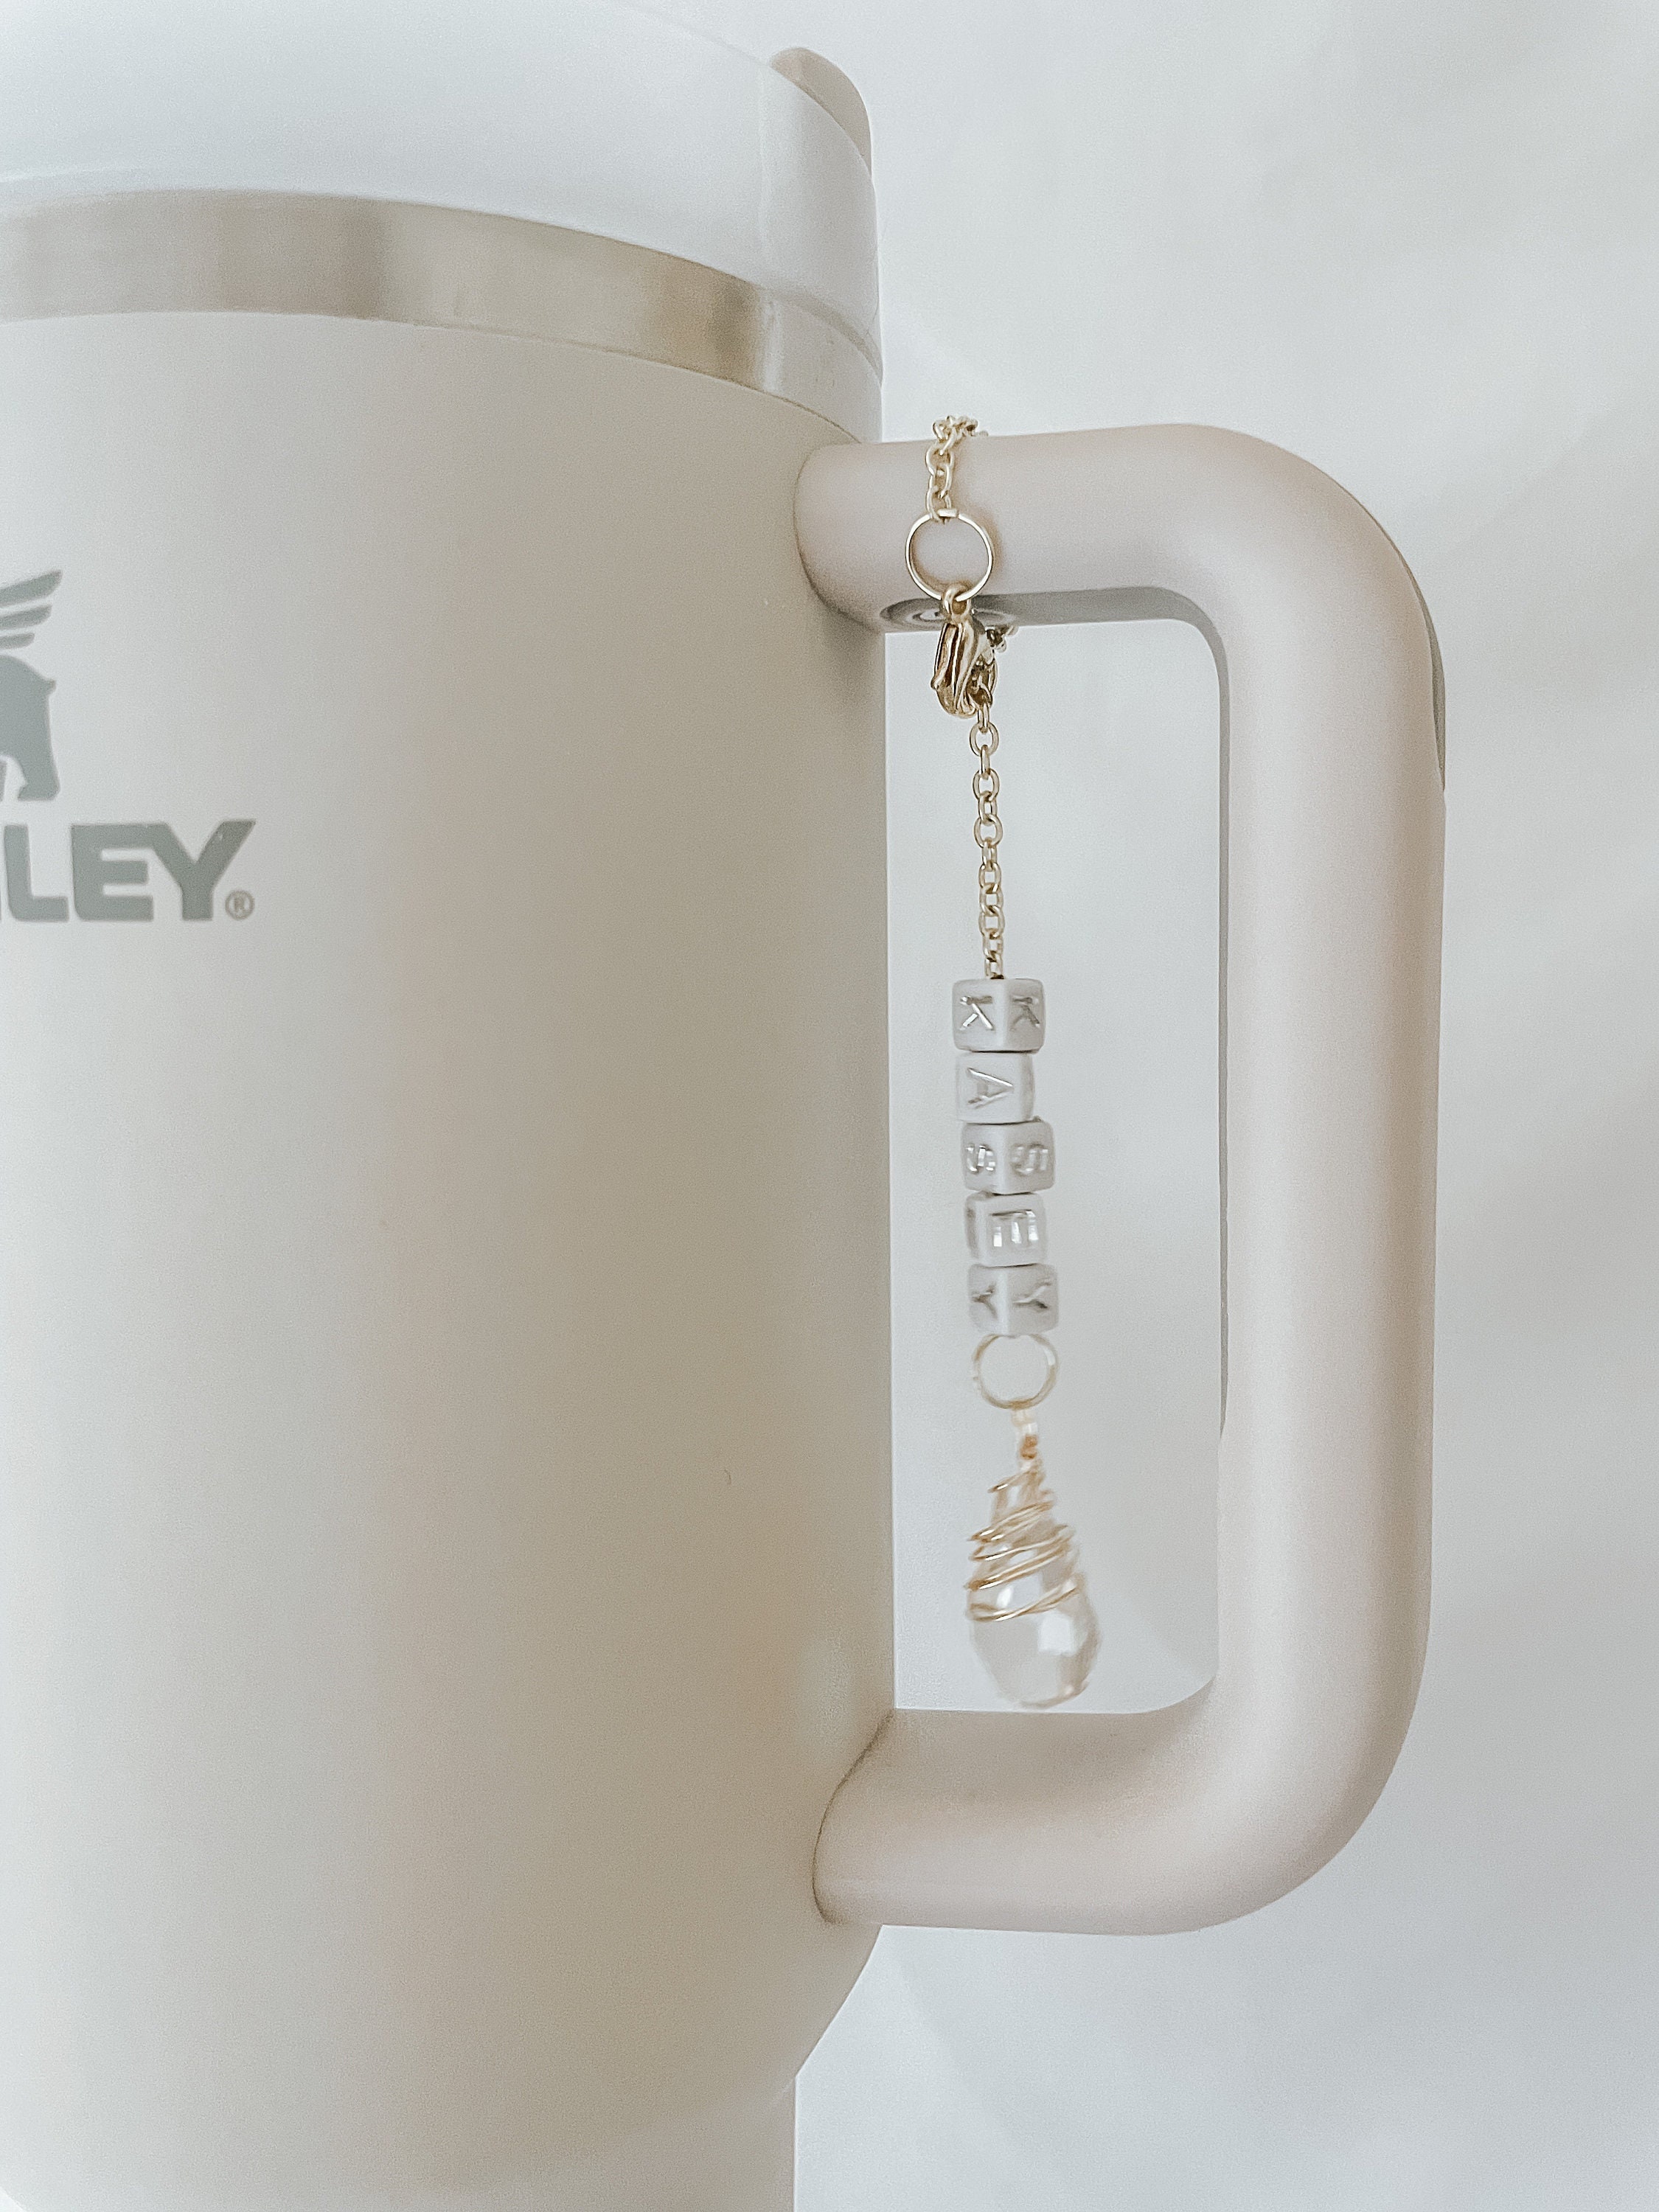 Stanley Tumbler Cup Charm Accessories for Water Bottle Stanley Cup Tumbler  Handle Charm Stanley Accessories Water Bottle Charm Accessories -  Hong  Kong